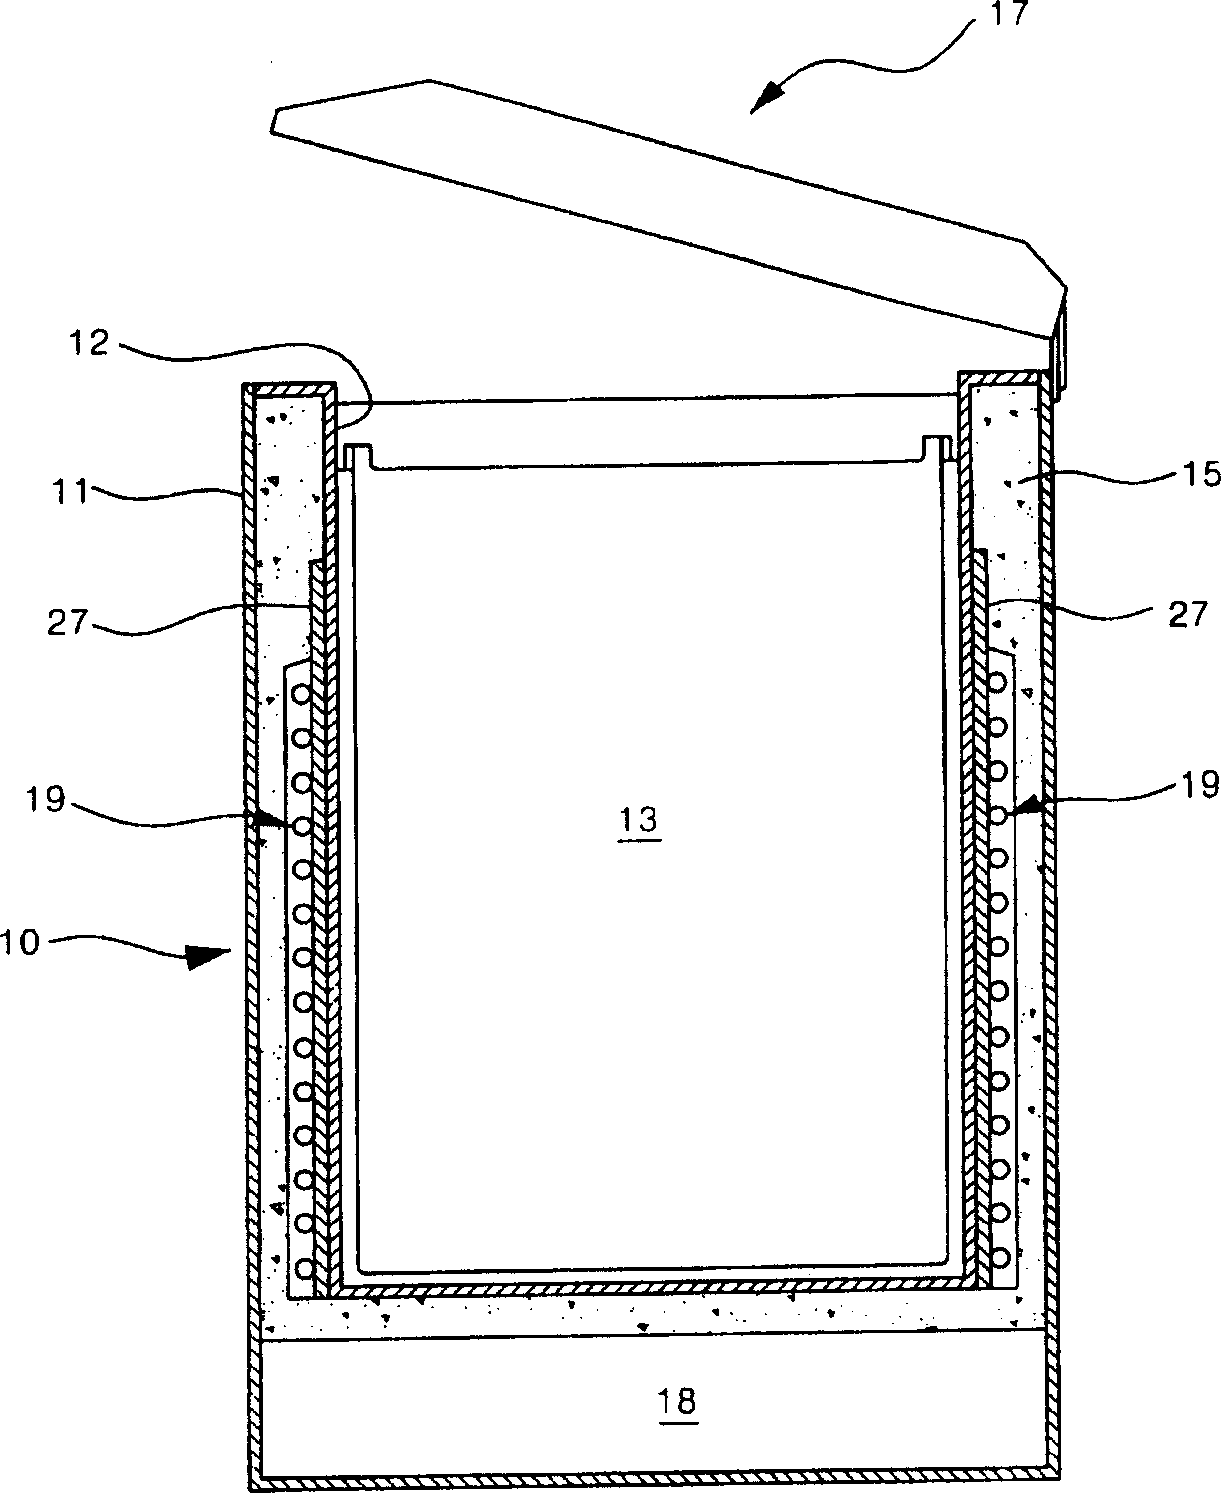 Thermal-insulating layer exhausting structure for refrigerator